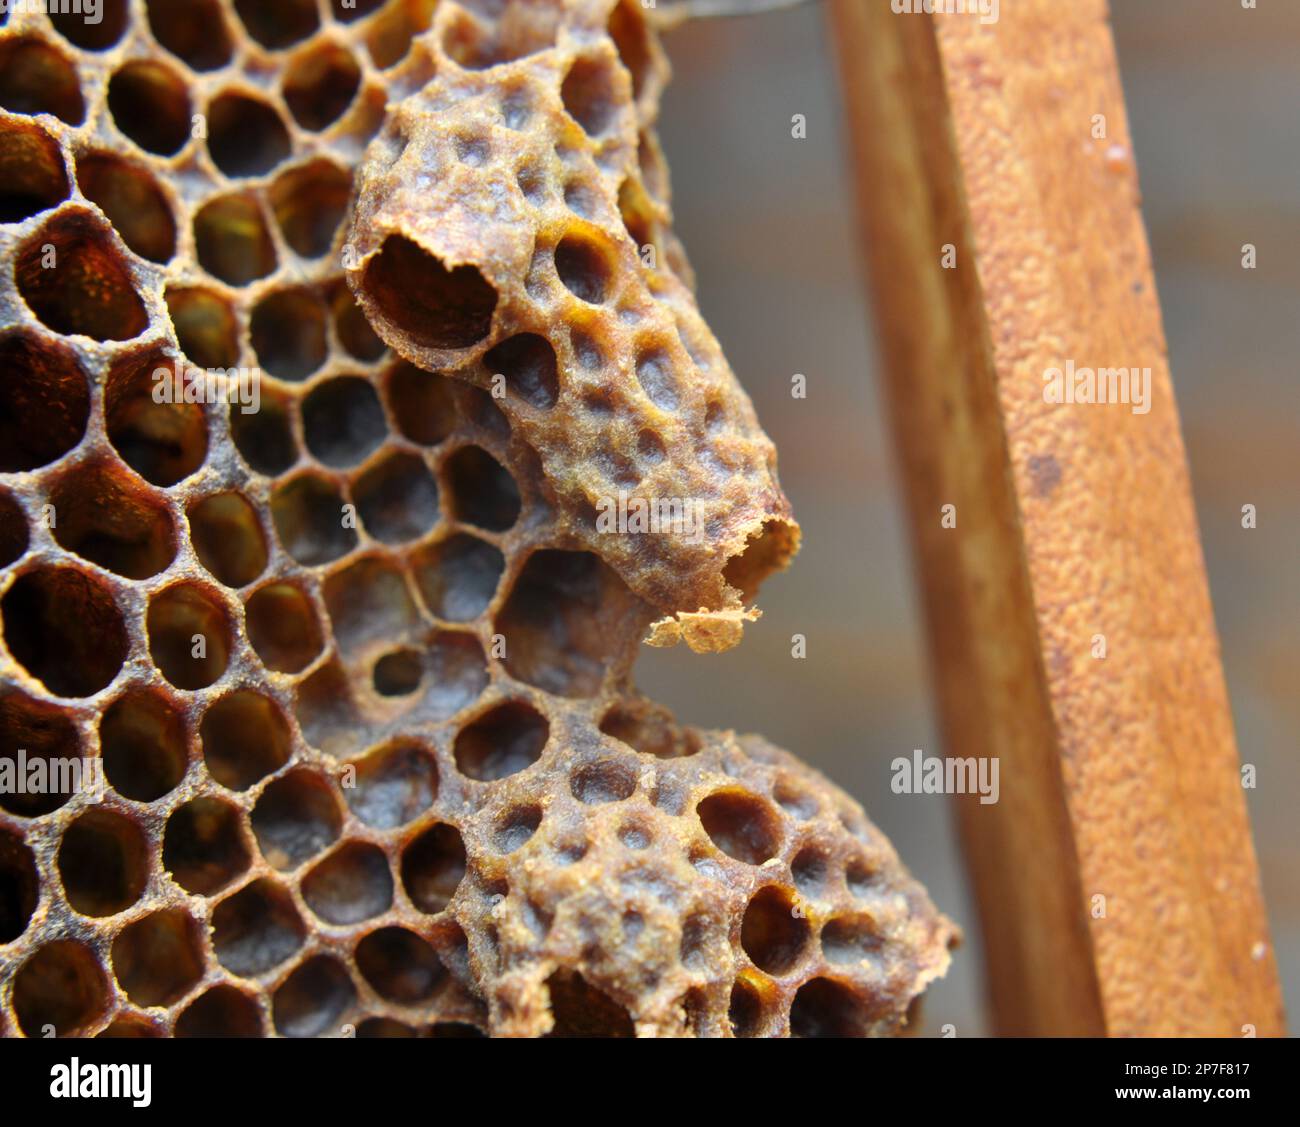 An open queen chamber from which a newborn queen bee emerged Stock Photo